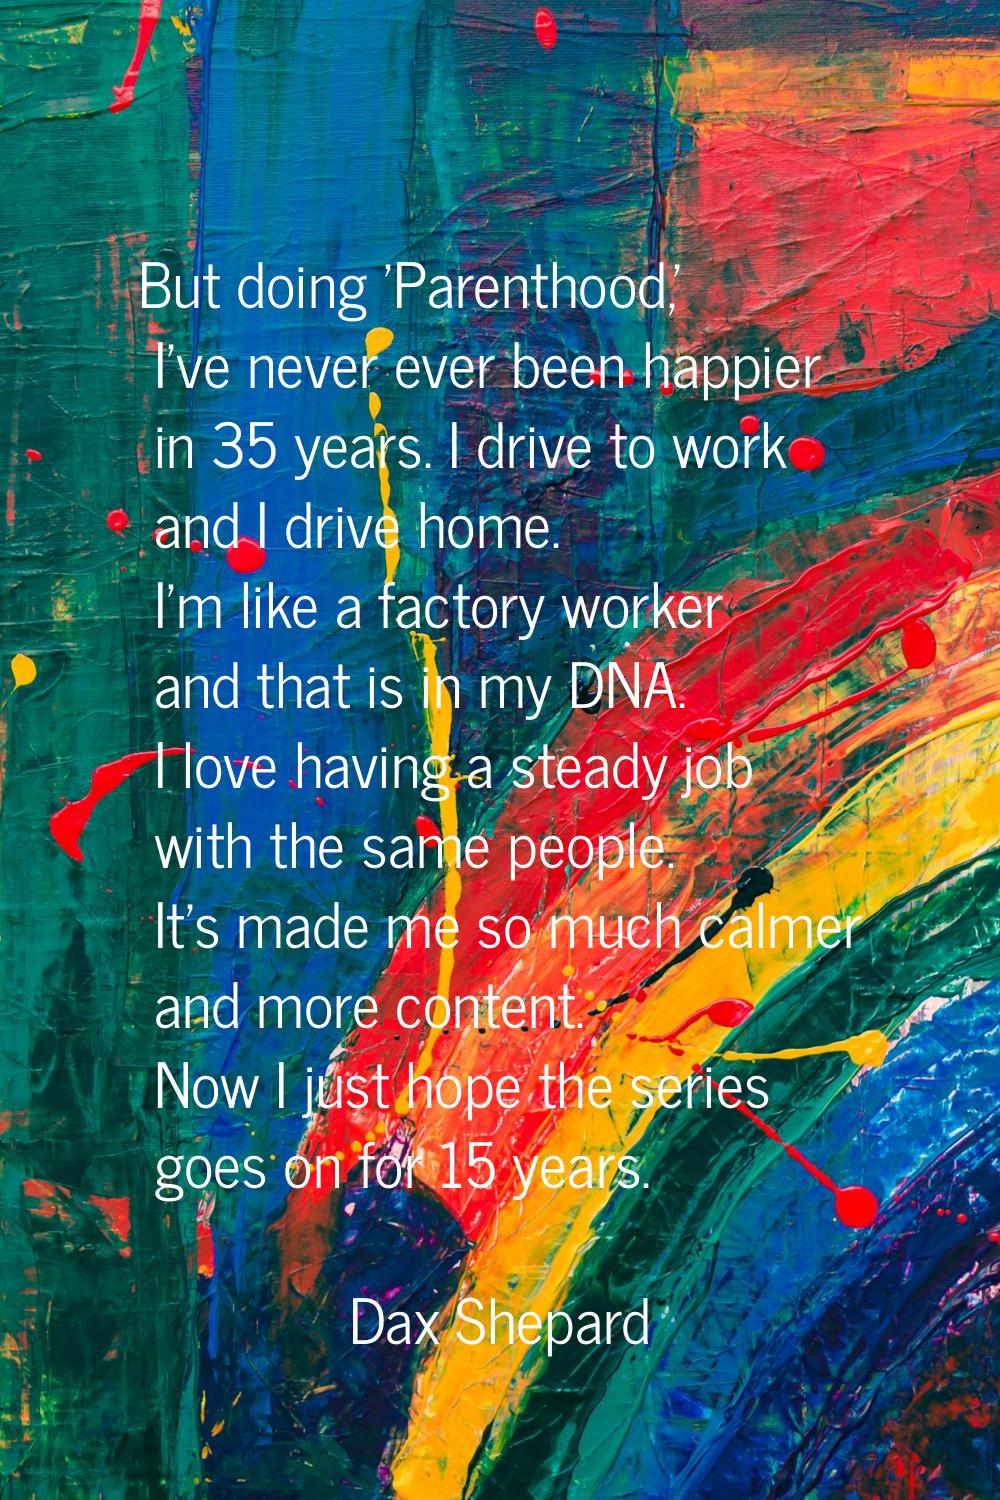 But doing 'Parenthood,' I've never ever been happier in 35 years. I drive to work and I drive home.